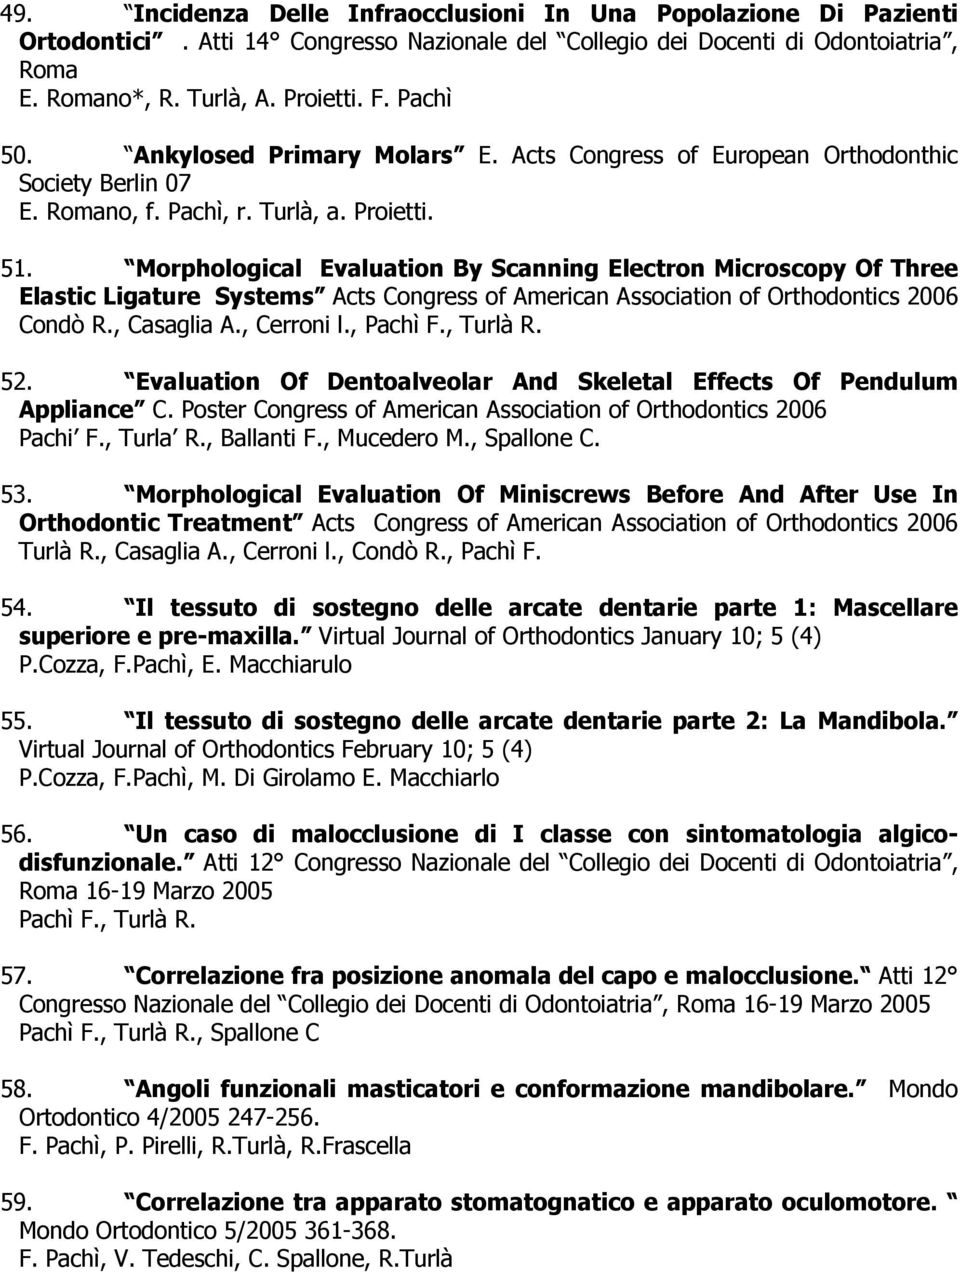 Morphological Evaluation By Scanning Electron Microscopy Of Three Elastic Ligature Systems Acts Congress of American Association of Orthodontics 2006 Condò R., Casaglia A., Cerroni l., Pachì F.